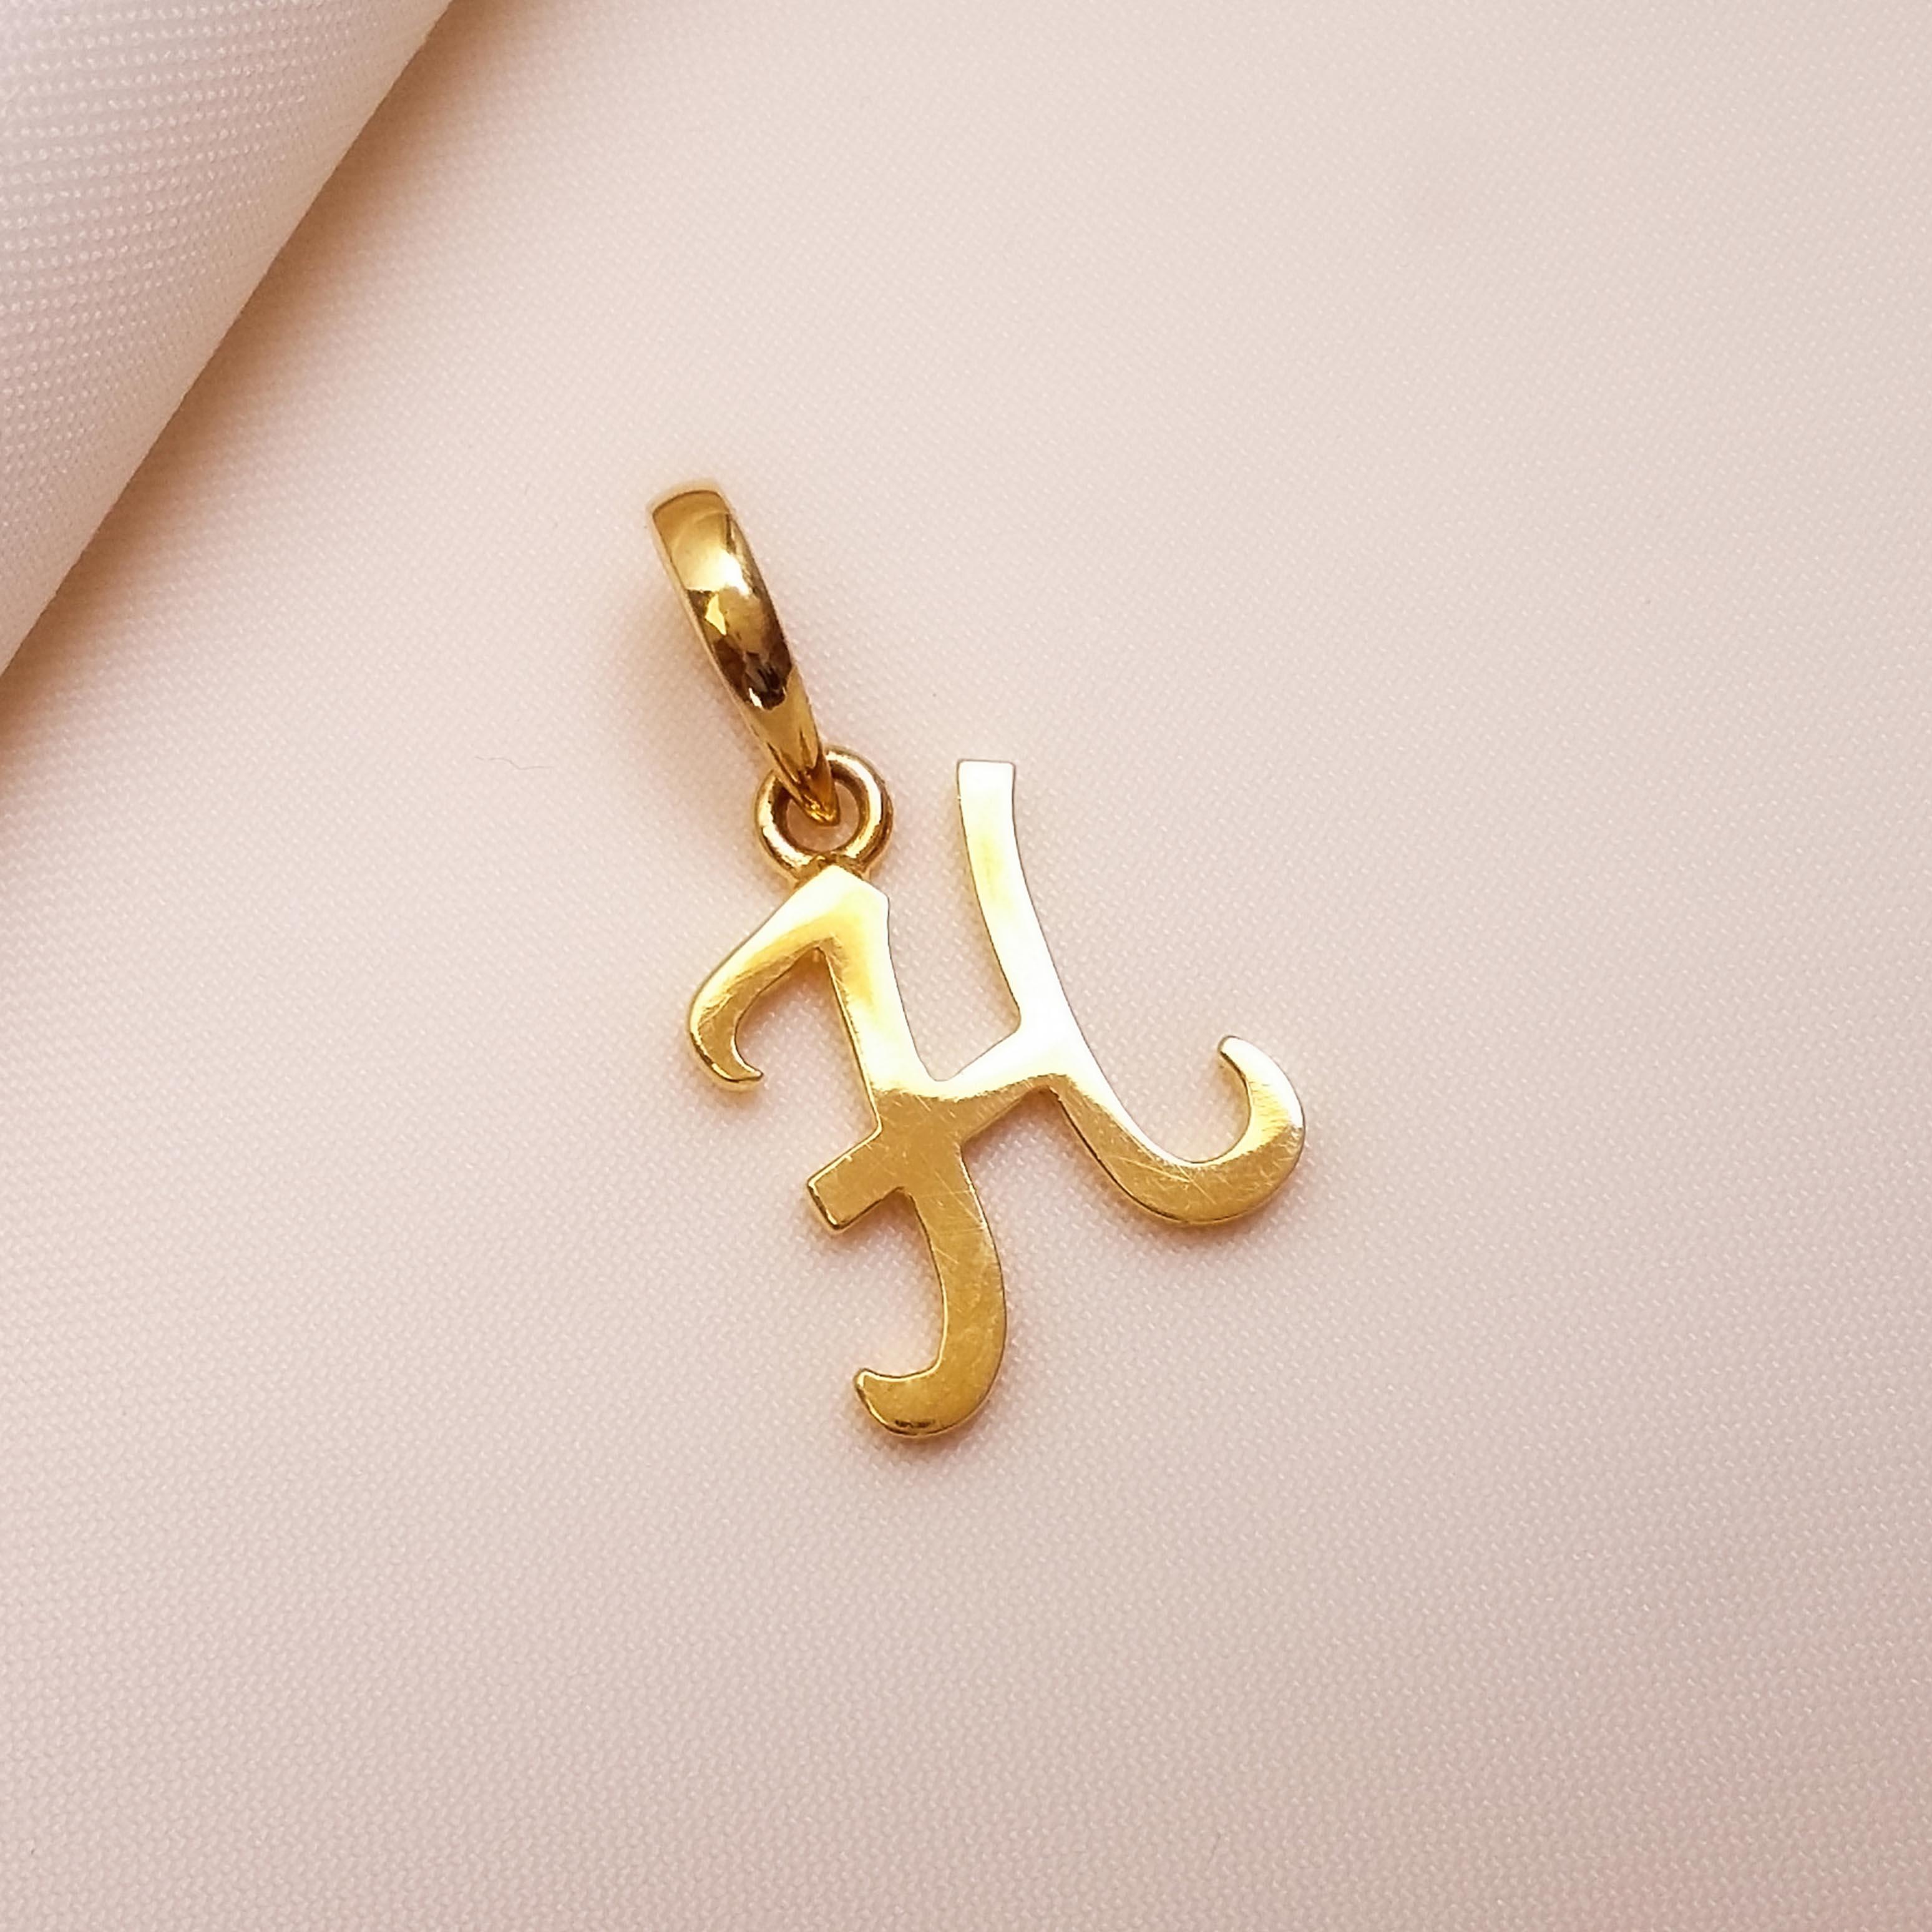 Buy H Heavenly Letter Gold Pendant 22 KT yellow gold (1.61 gm). | Online By Giriraj Jewellers